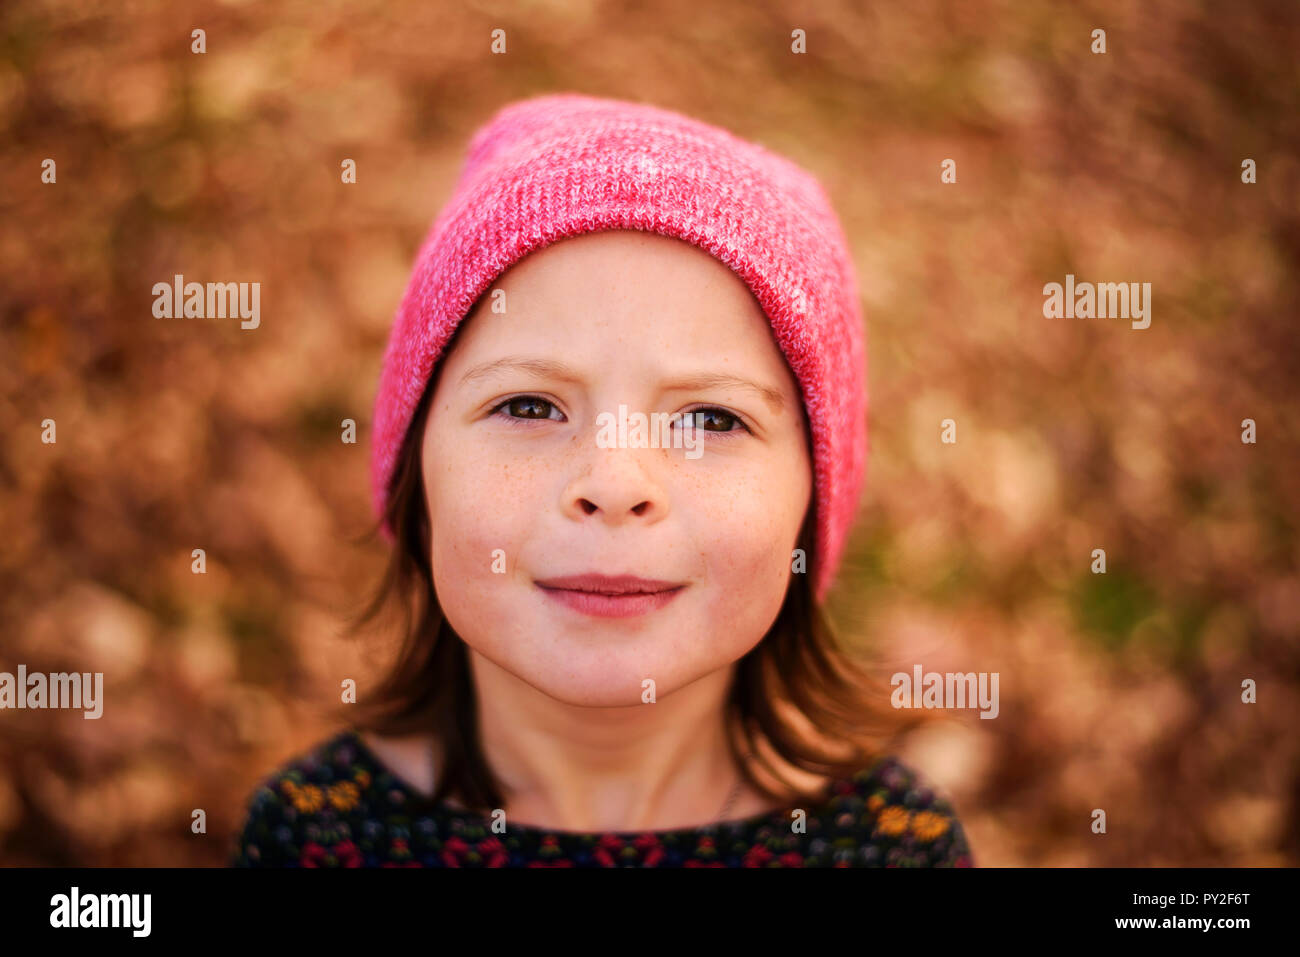 Portrait of a smiling girl standing outdoors, United States Stock Photo